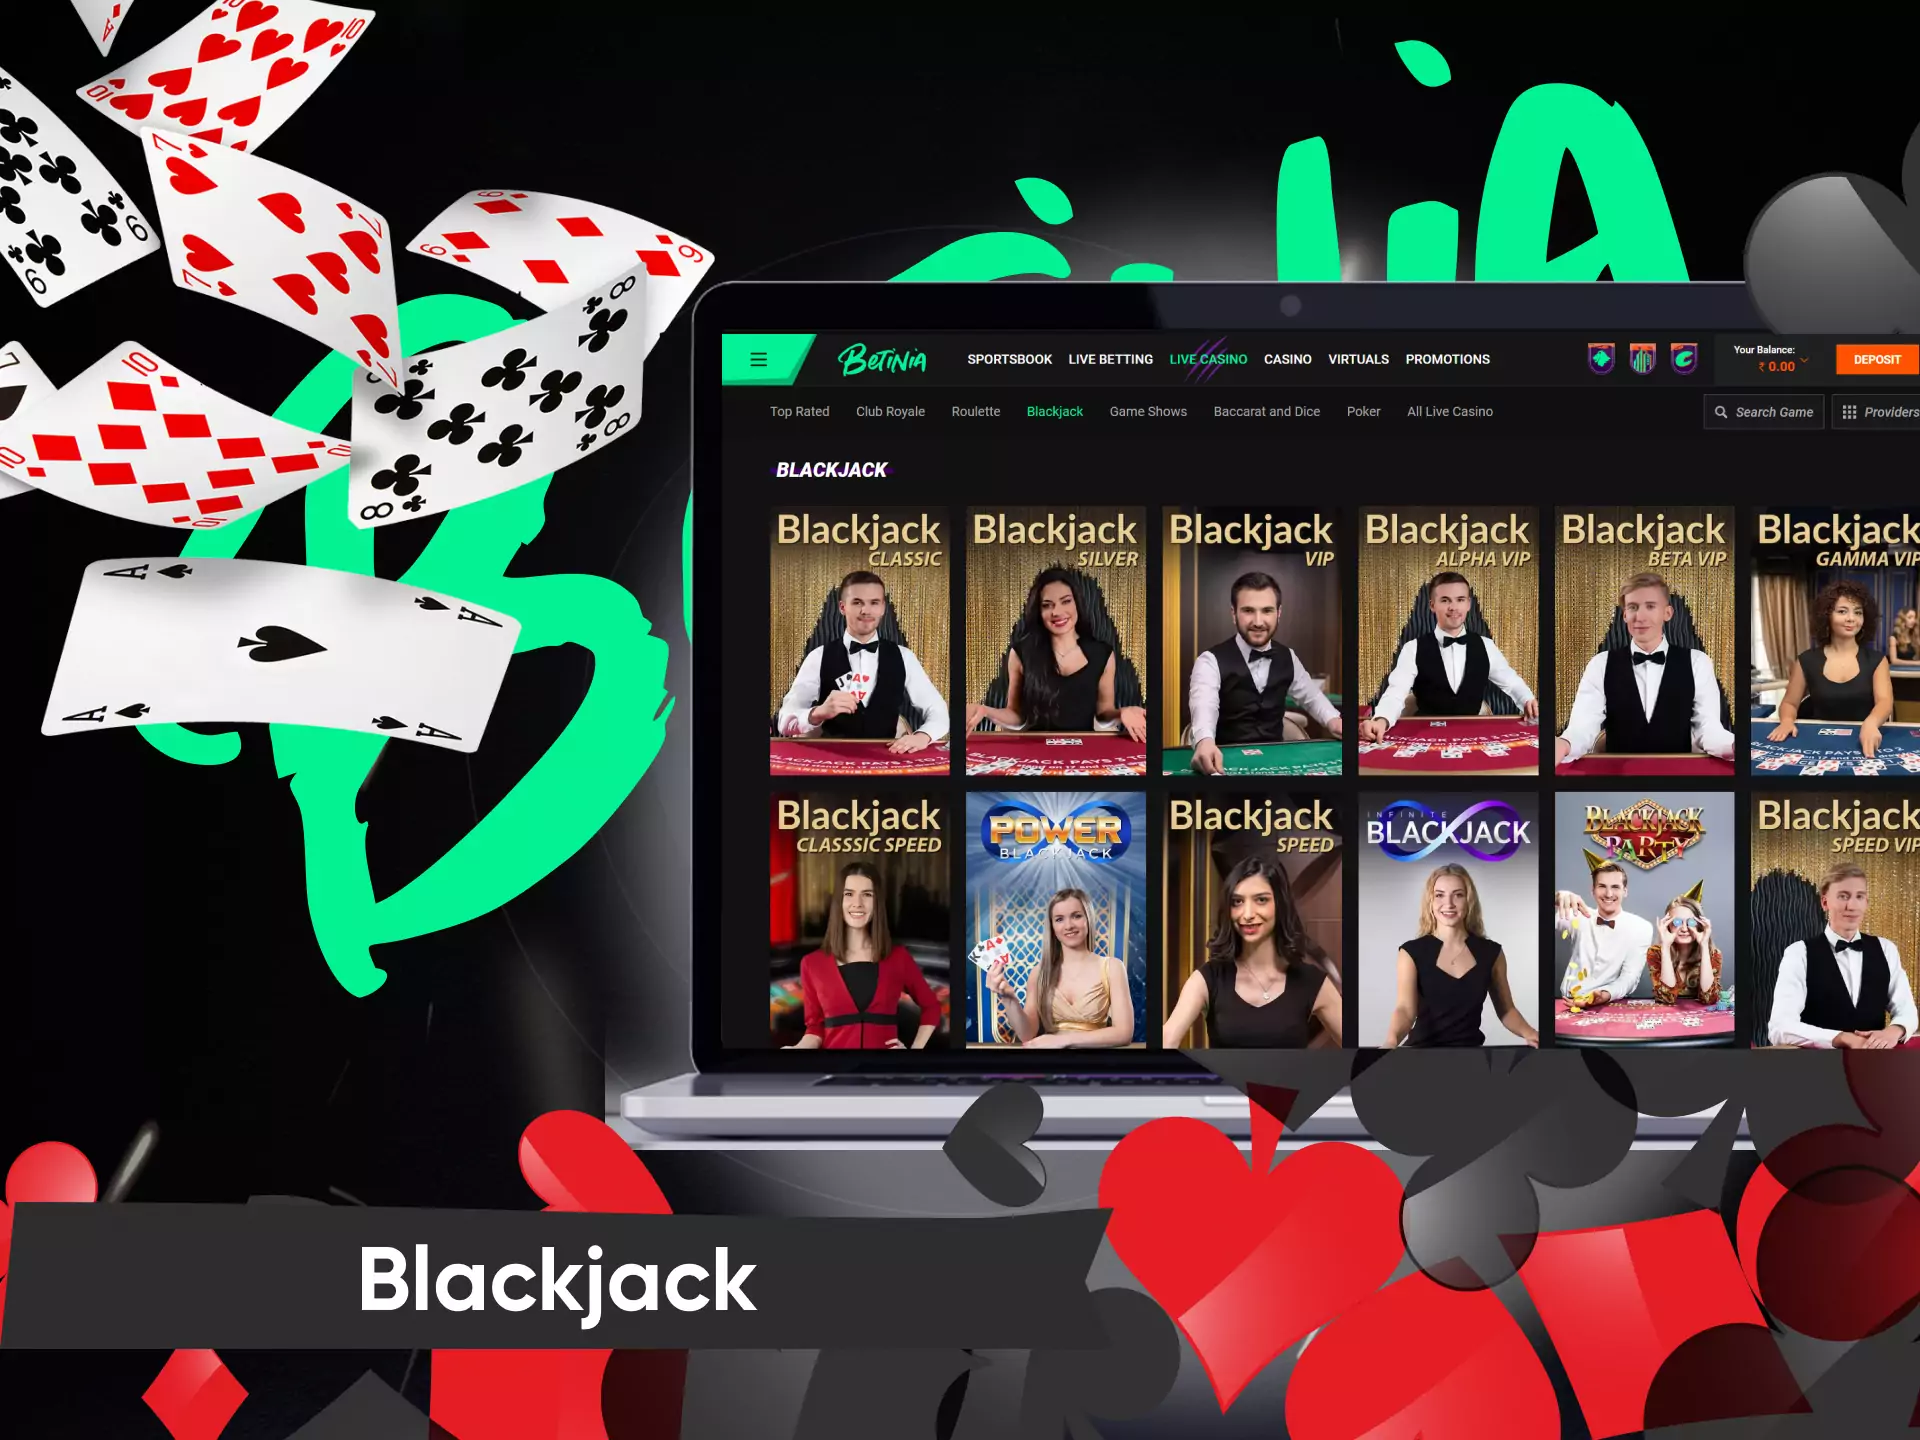 In the Betinia Casino, blackjack is one of the most popular table games.